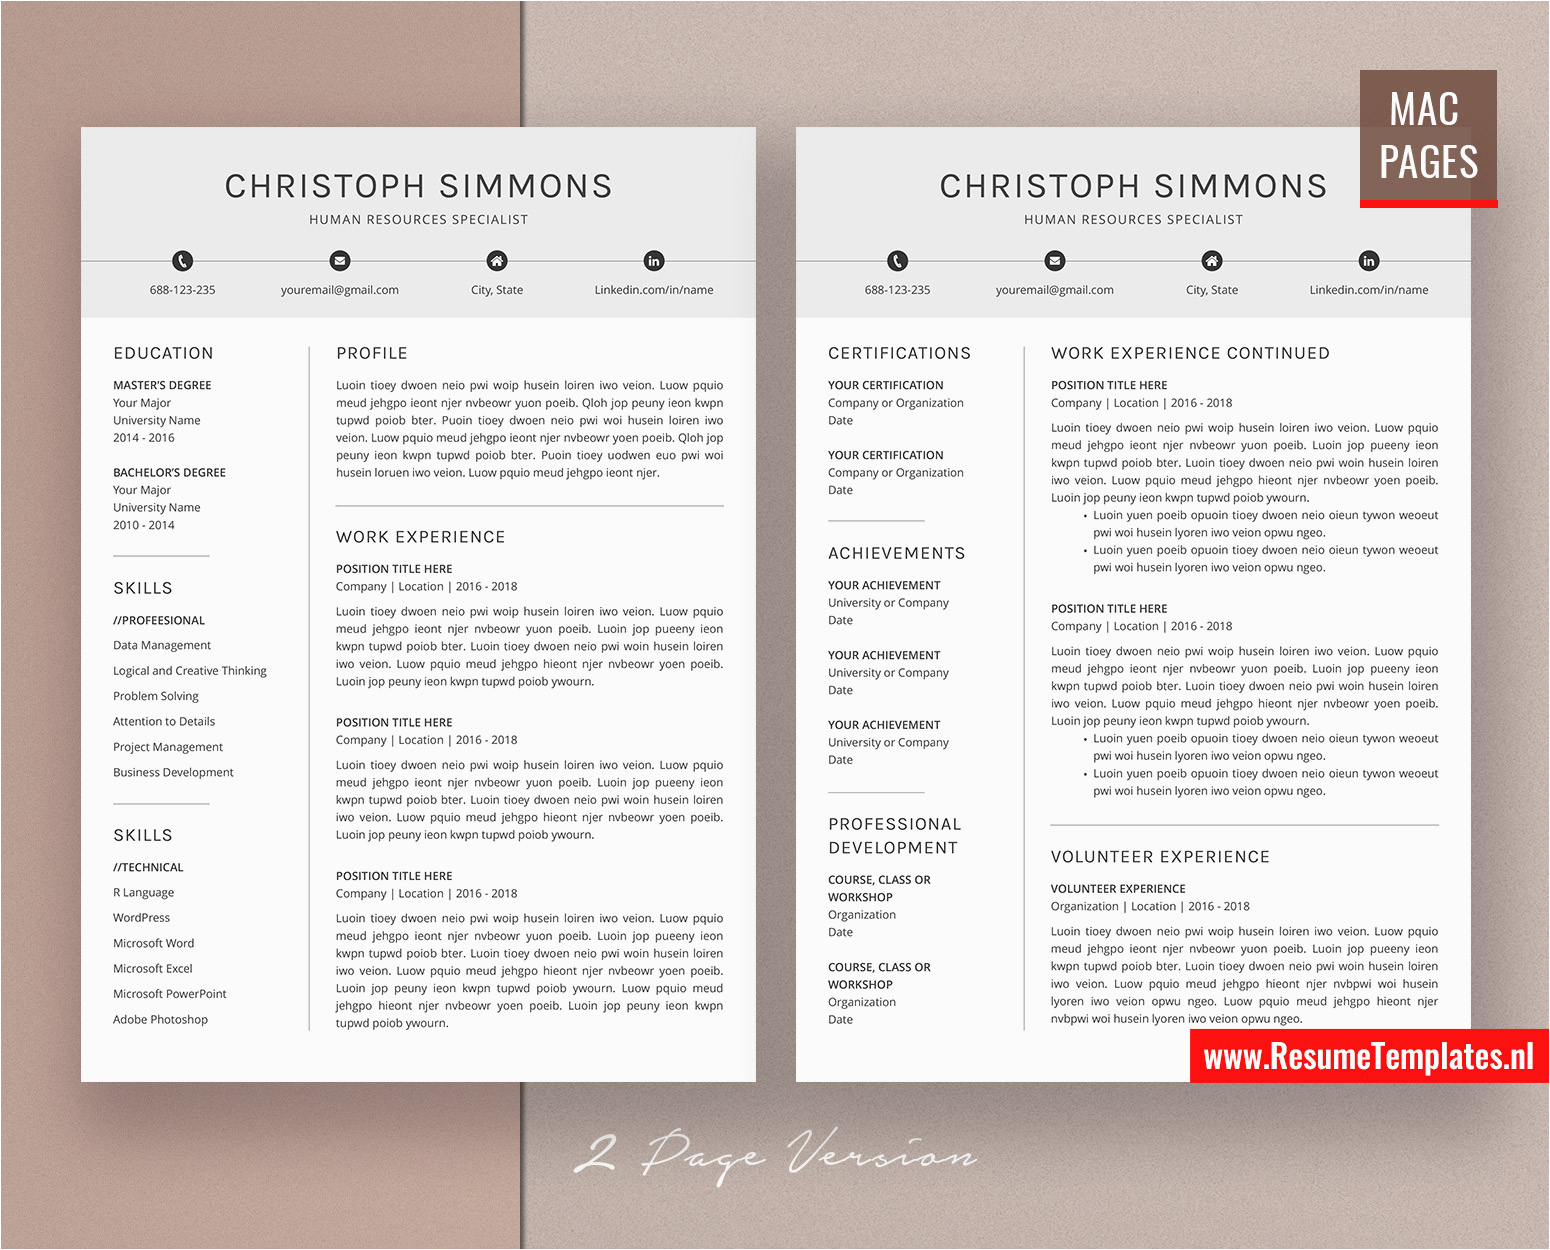 Apple Pages Resume Template Download Free Minimalist Cv Template for Mac Pages Cover Letter